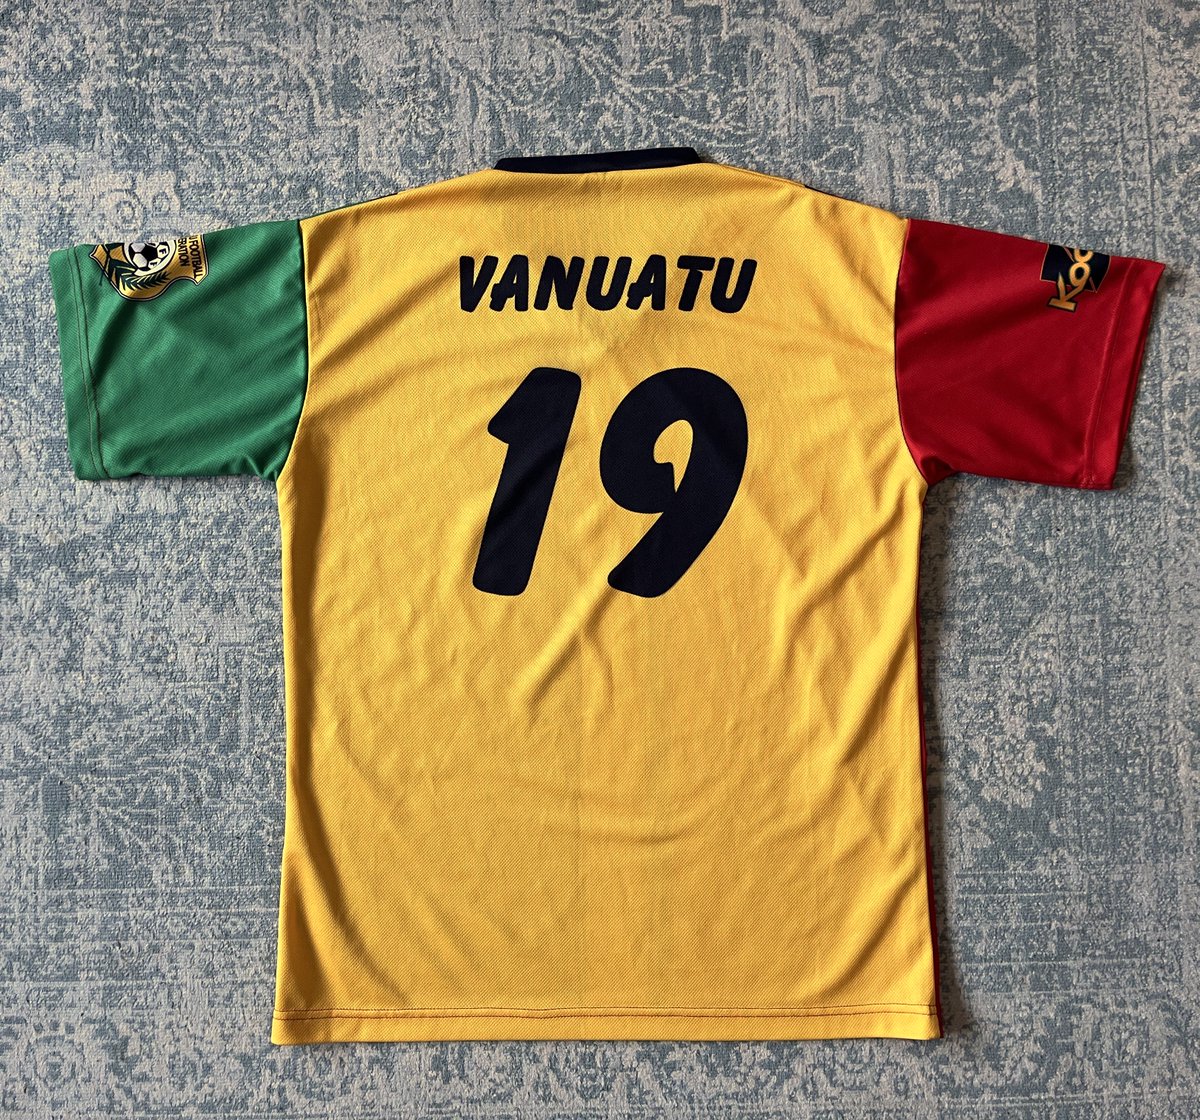 Vanuatu 🇻🇺 This extremely rare flag shirt of Vanuatu's national team has always been one of my holy grails. I'm beyond happy to finally have a matchworn version of this beauty in my hands! Probably worn in various matches in 2007/08. More: worldshirts.net/post/vanuatu-2